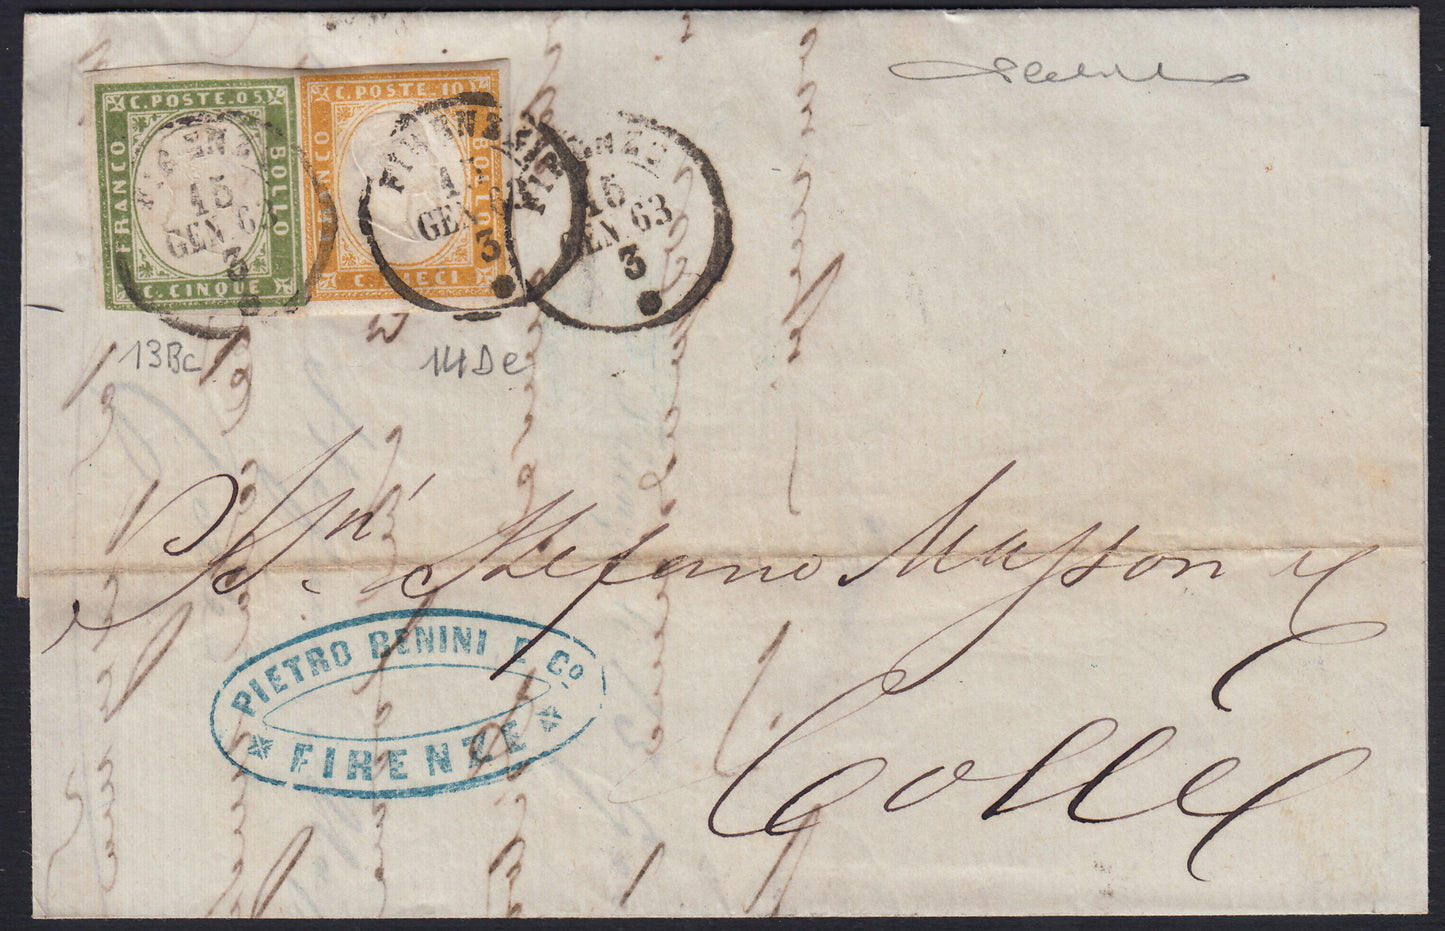 256 - 1863 - IV issue, Letter sent from Florence to Colle 15/1/63 franked with c. 5 olive green III composition + c. 10 orange ocher II plate (13Bc + 14De)